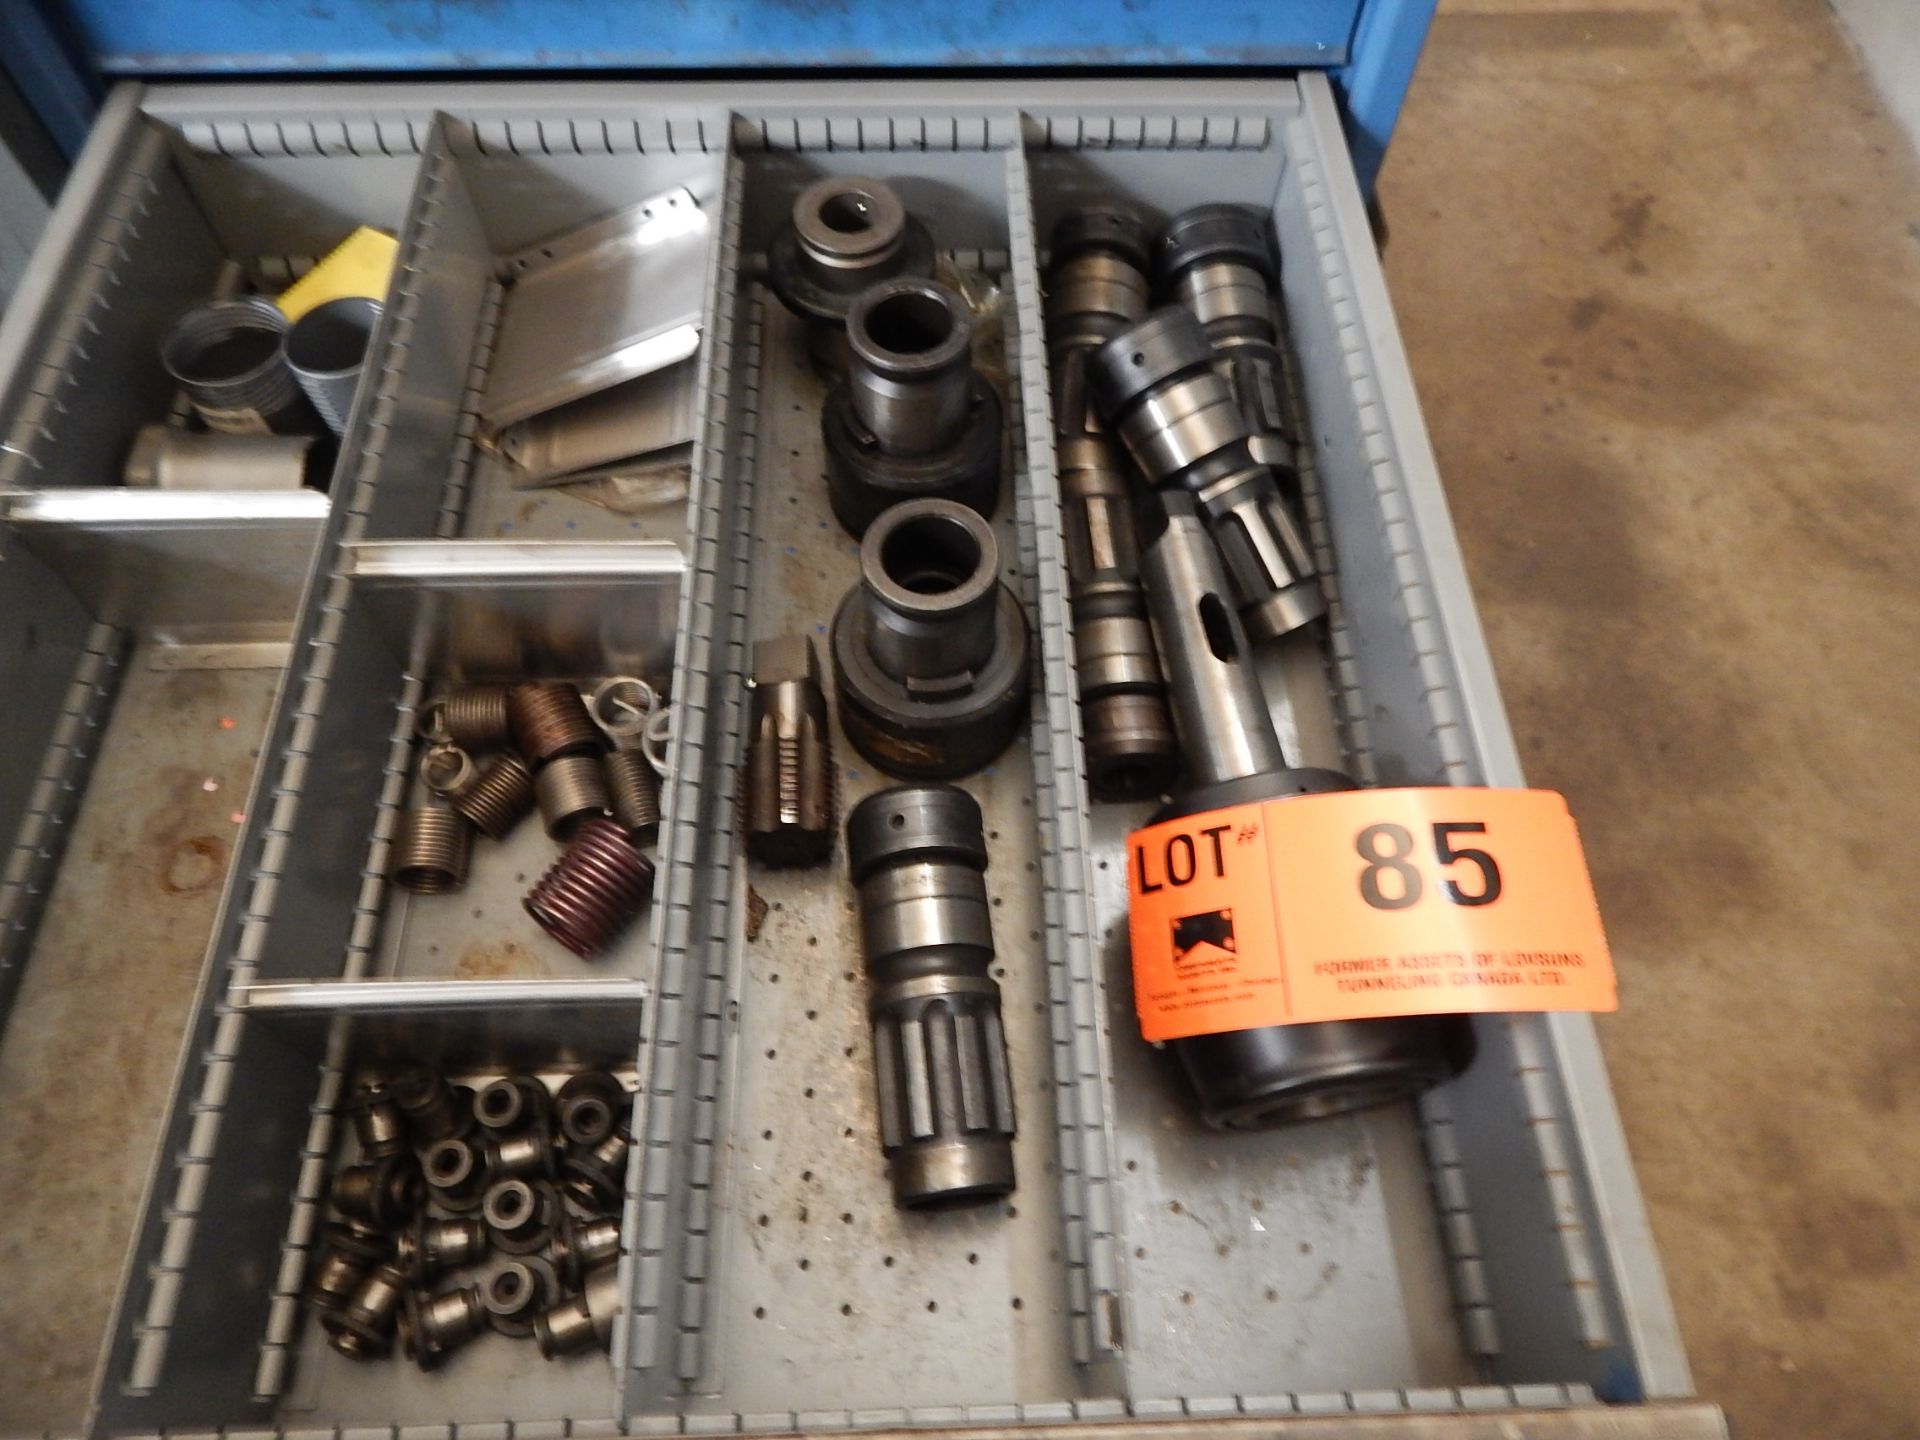 LOT/ CONTENTS OF DRAWER CONSISTING OF QUICK RELEASE TOOL HOLDERS